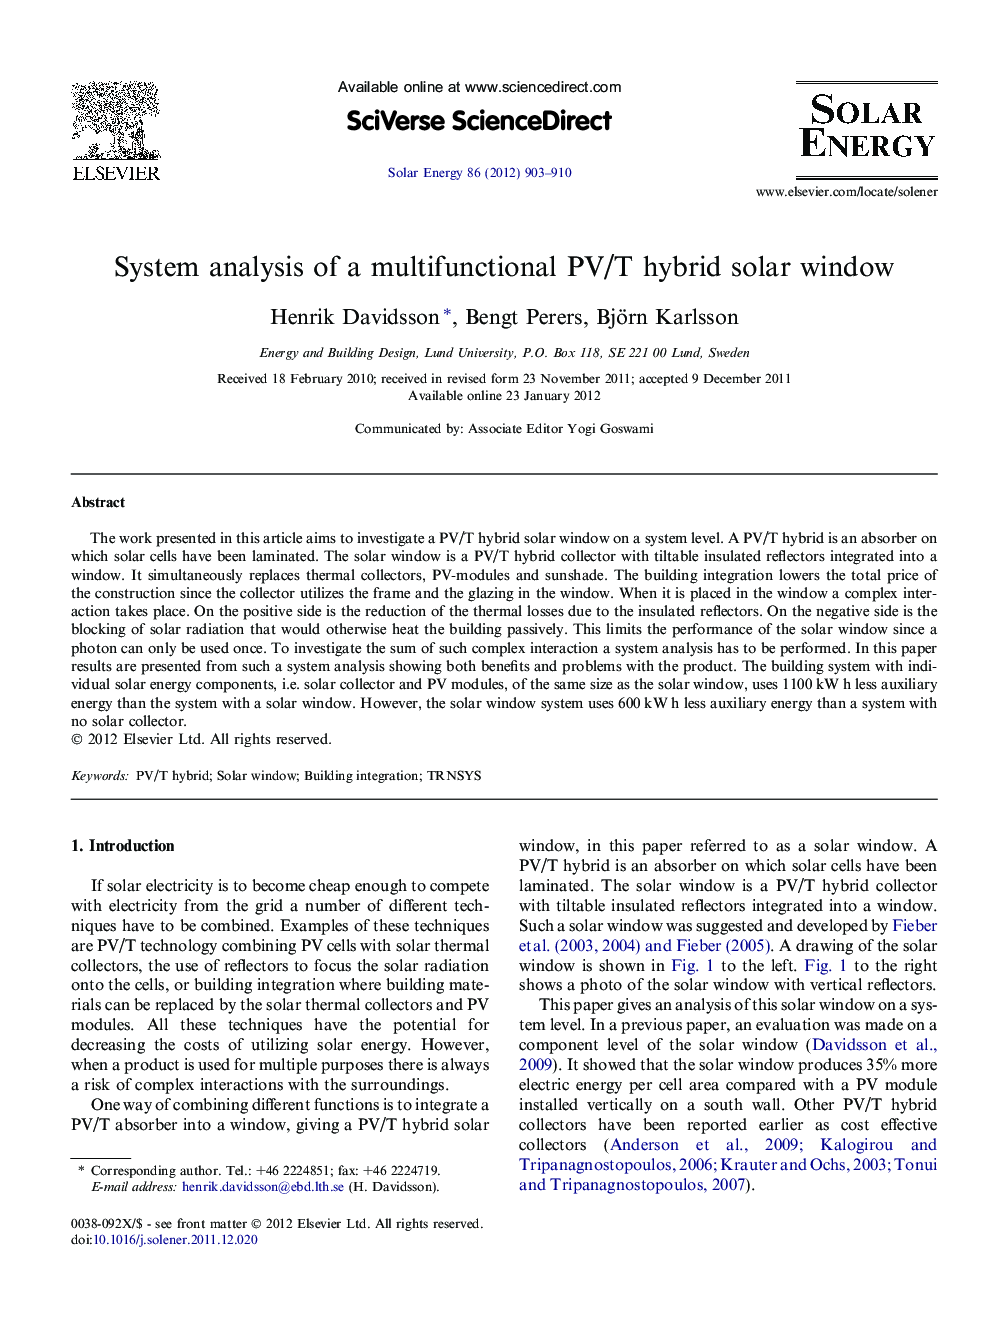 System analysis of a multifunctional PV/T hybrid solar window